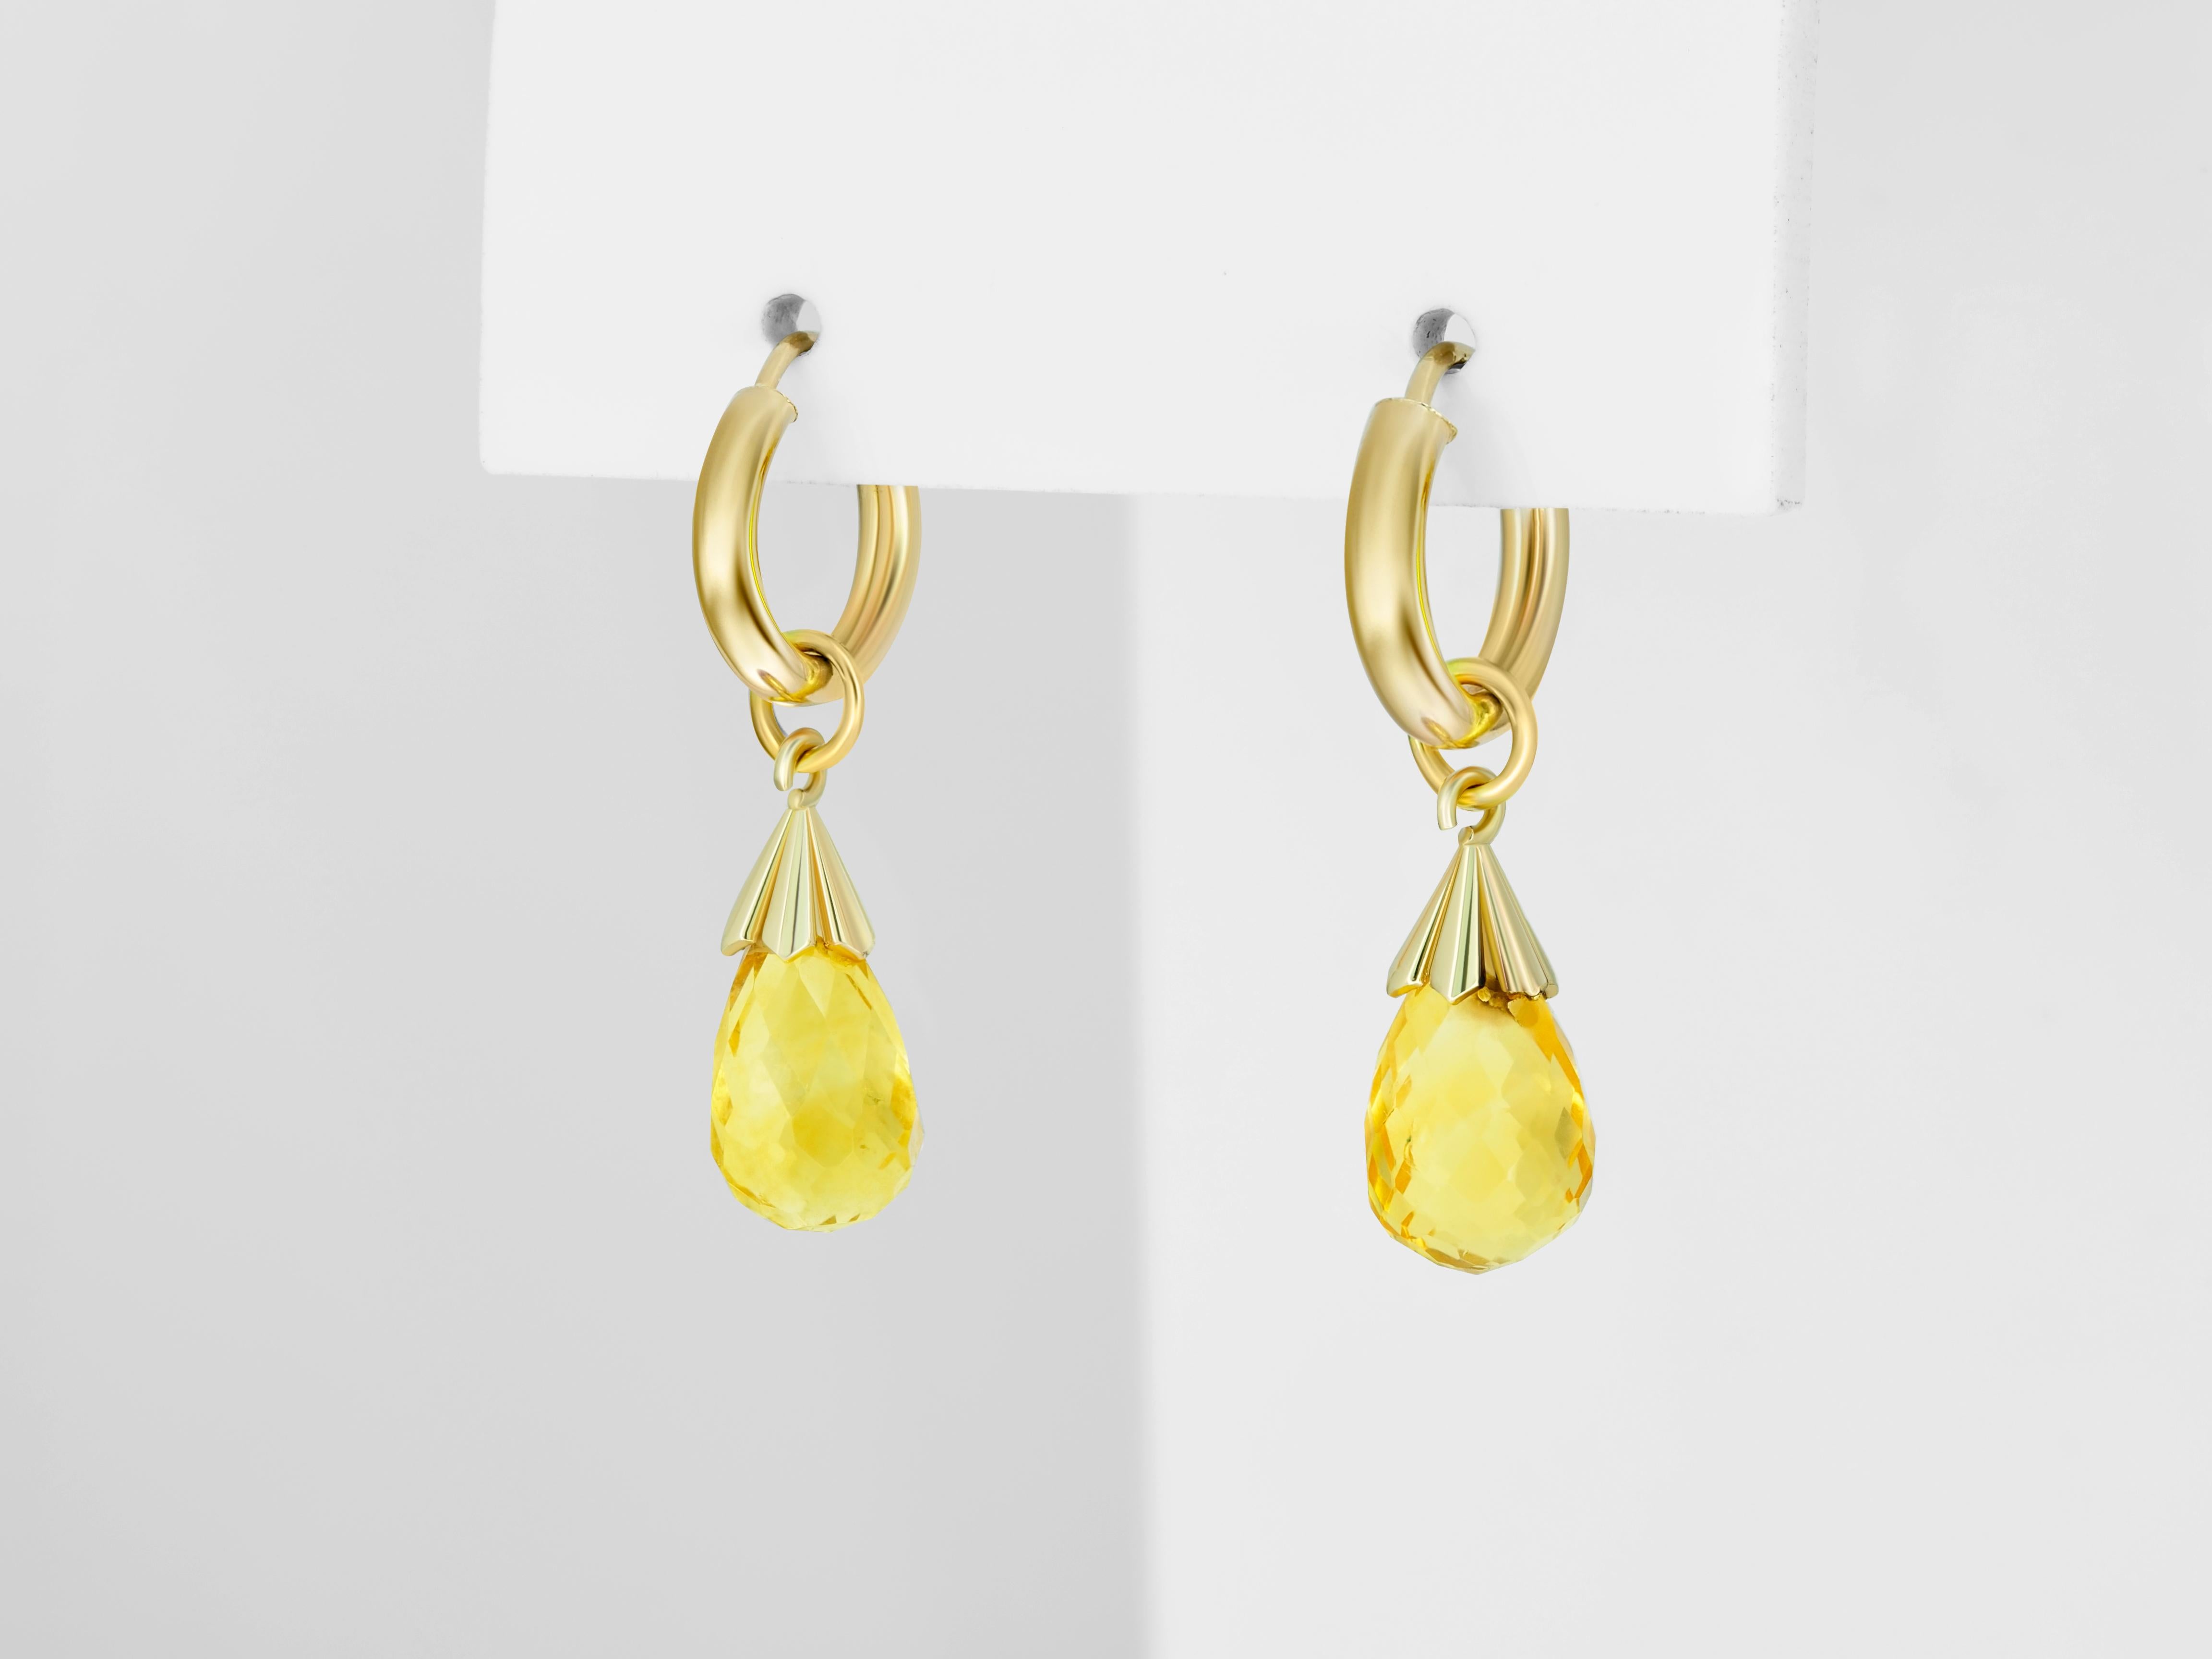 Briolette Cut Hoop Earrings and Citrine Briolette Charms in 14k Gold For Sale